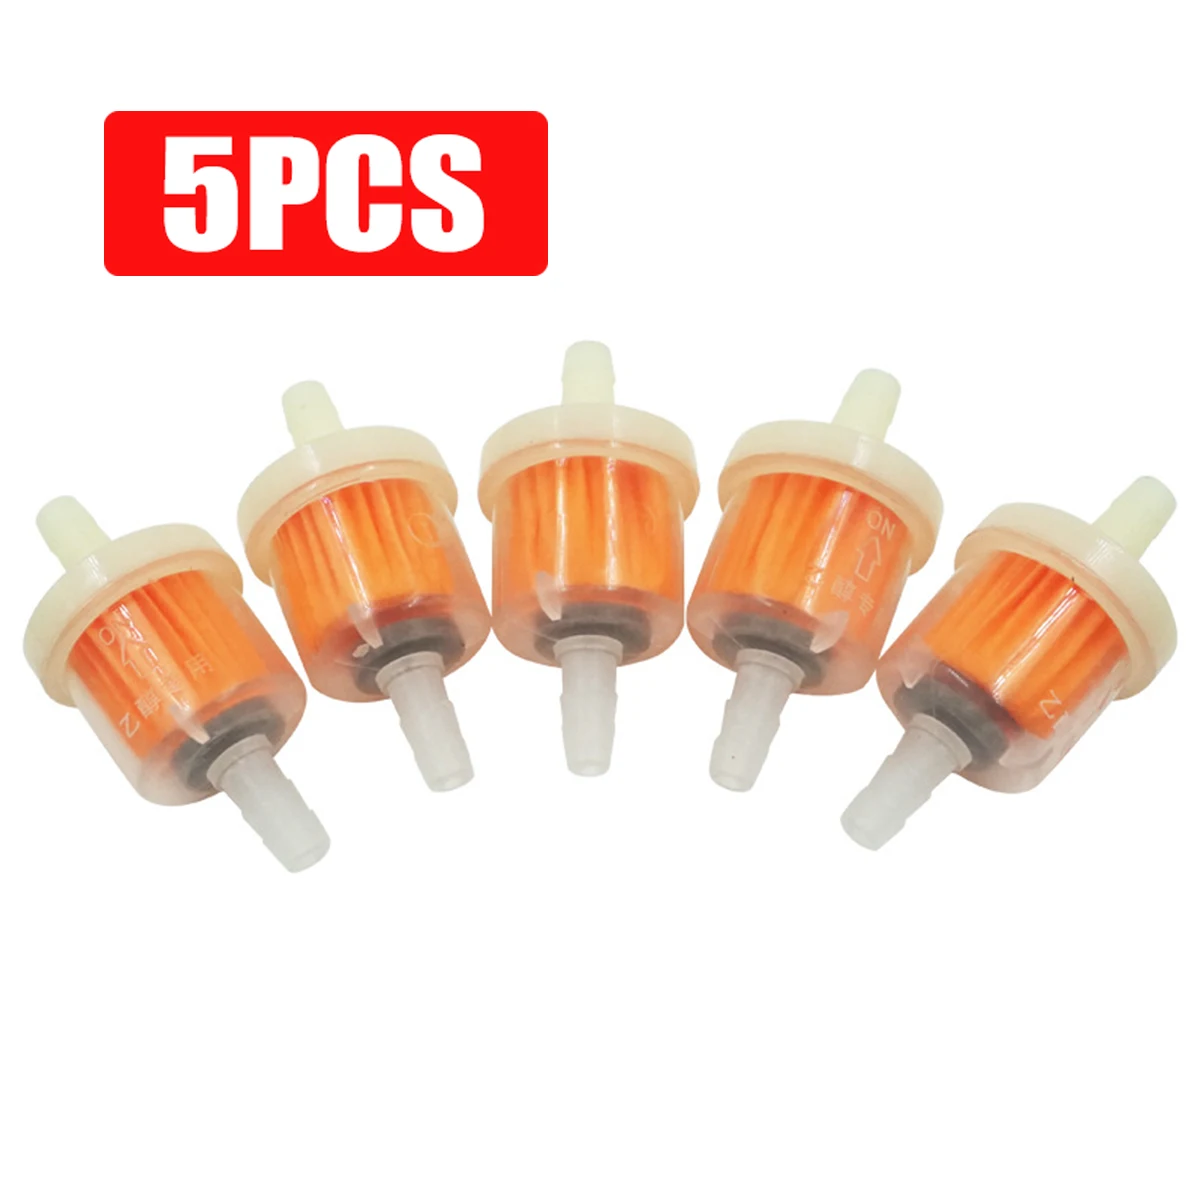 

5Pcs Motorcycle Petrol Gas Fuel Gasoline Oil Filter for Scooter Motorcycle Moped Scooter Dirt Bike ATV Go Kart oil fuel filter